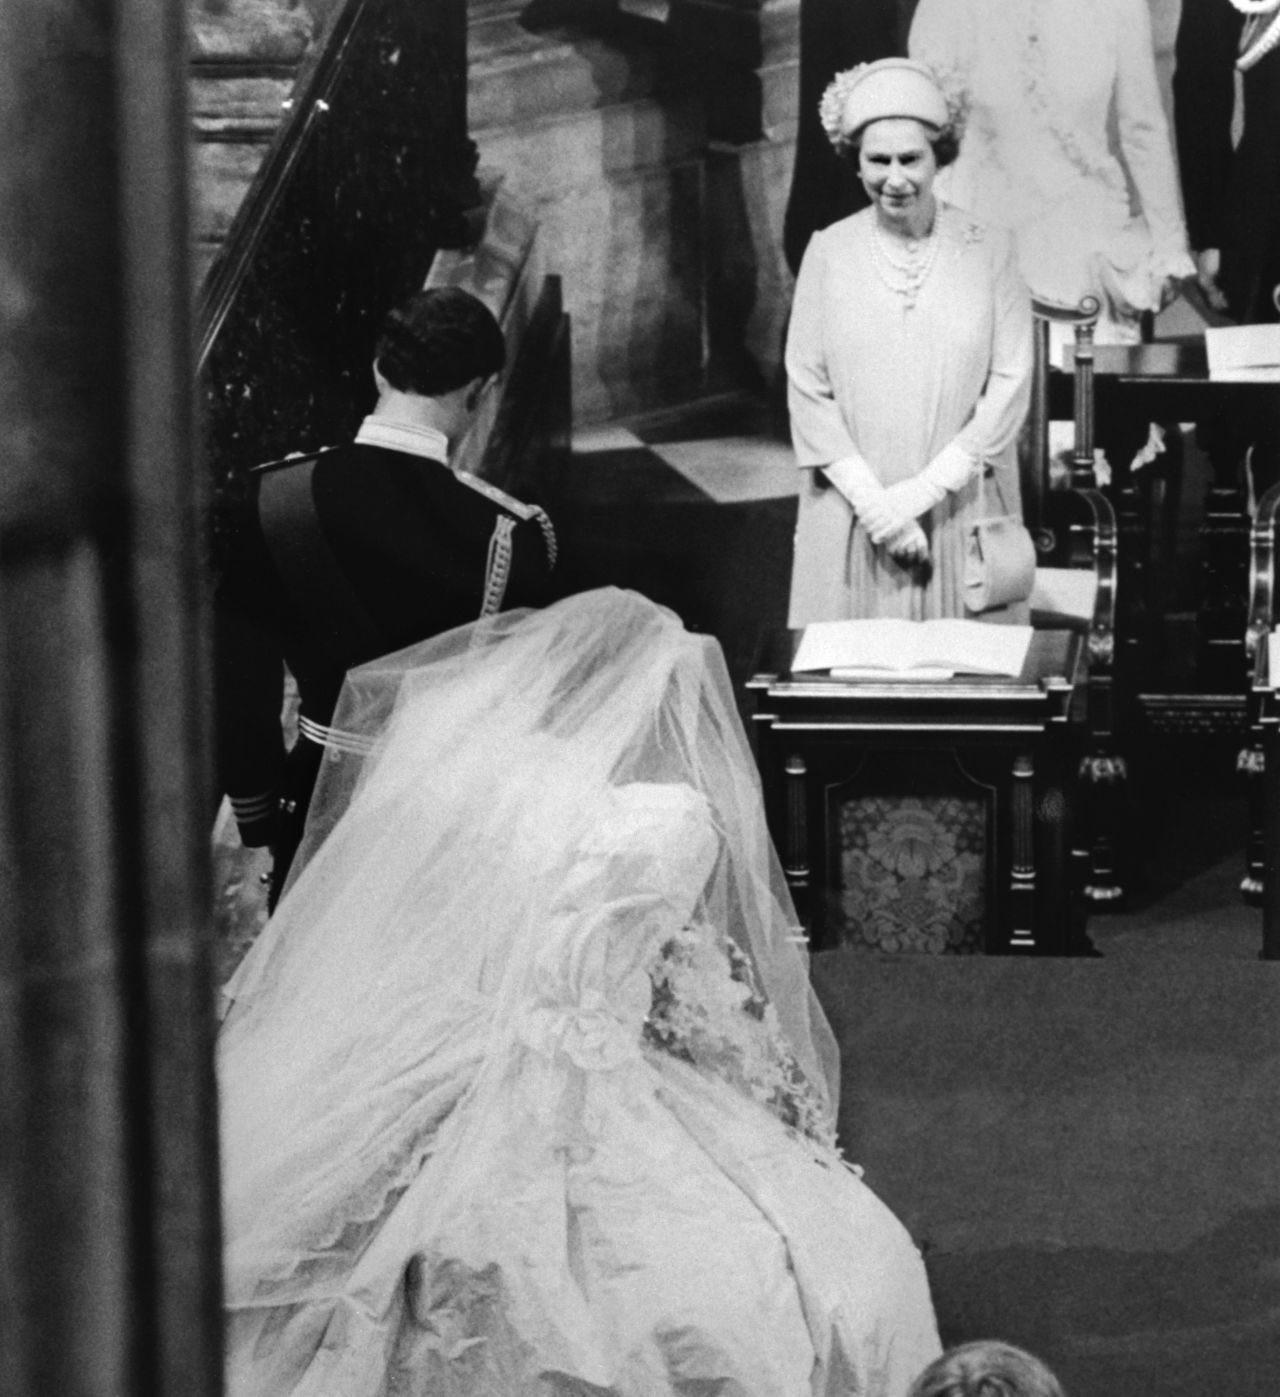 The queen's eldest child, Charles, Prince of Wales, bows while his new bride, Princess Diana, curtsies to the British sovereign as they leave St Paul's Cathedral, on July 29, 1981.